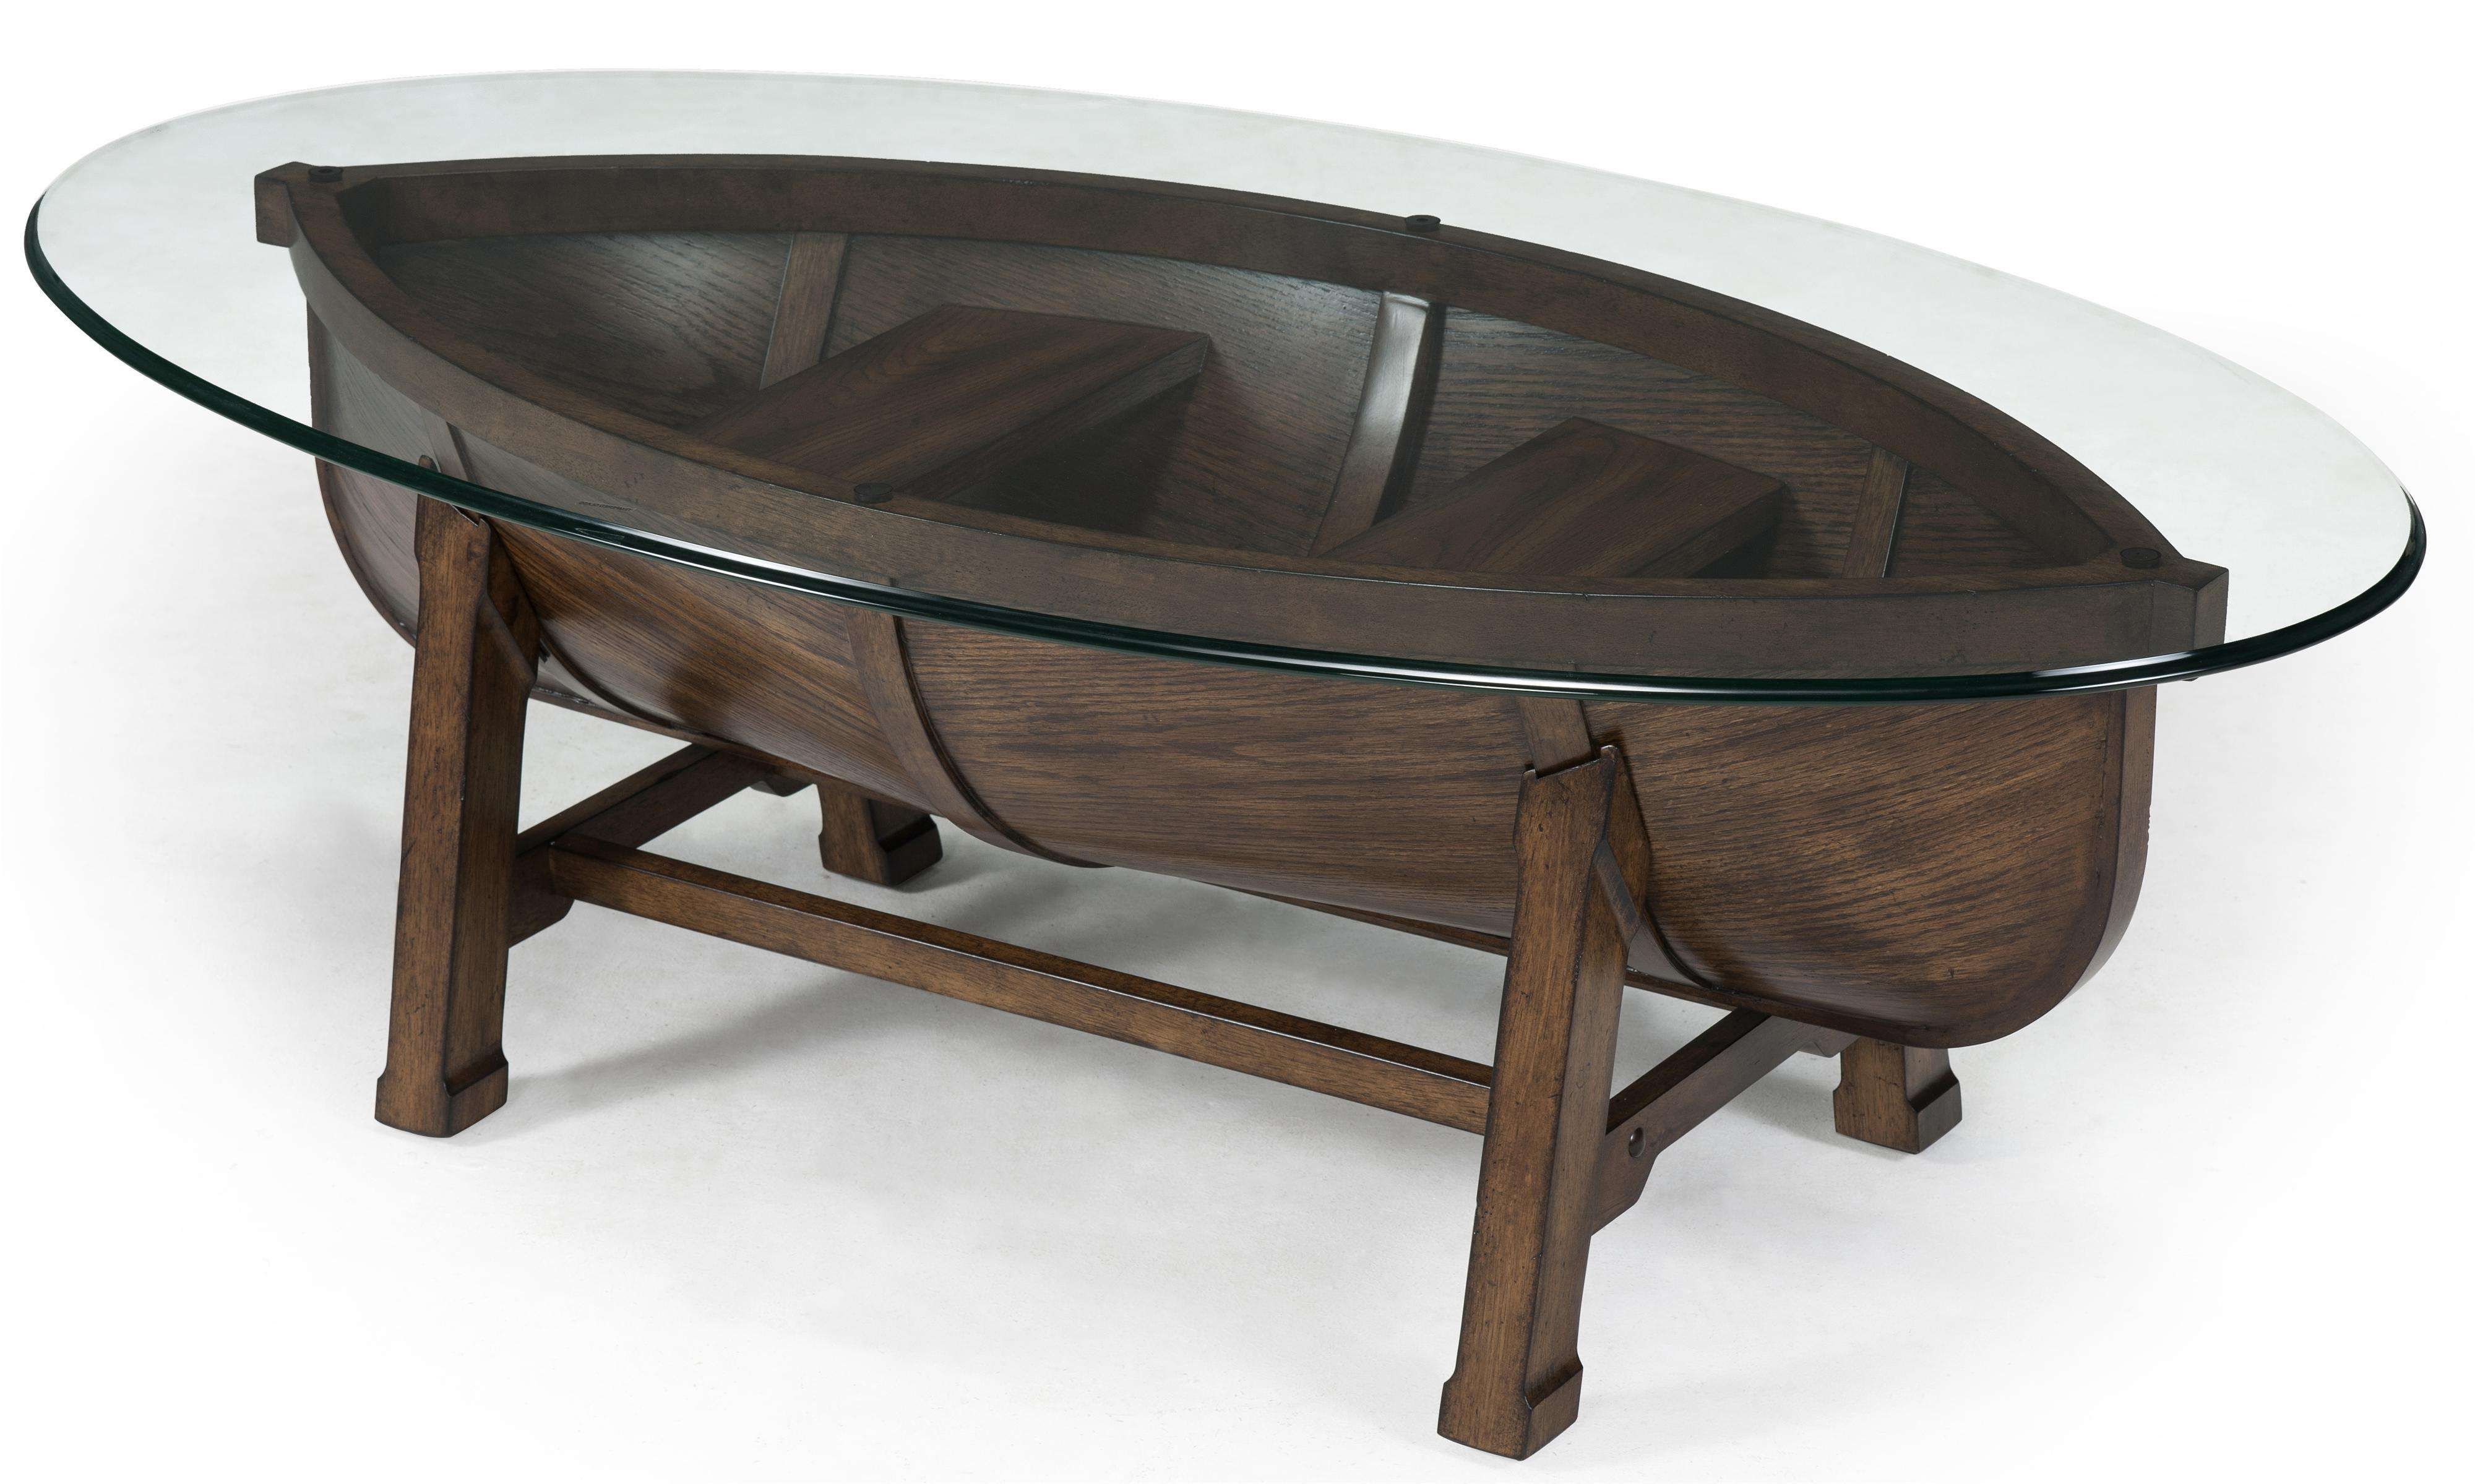 Fashionable Oval Shaped Coffee Tables With Regard To Natural Design Of The Oval Shaped Glas Coffe Table That Has High (View 15 of 20)